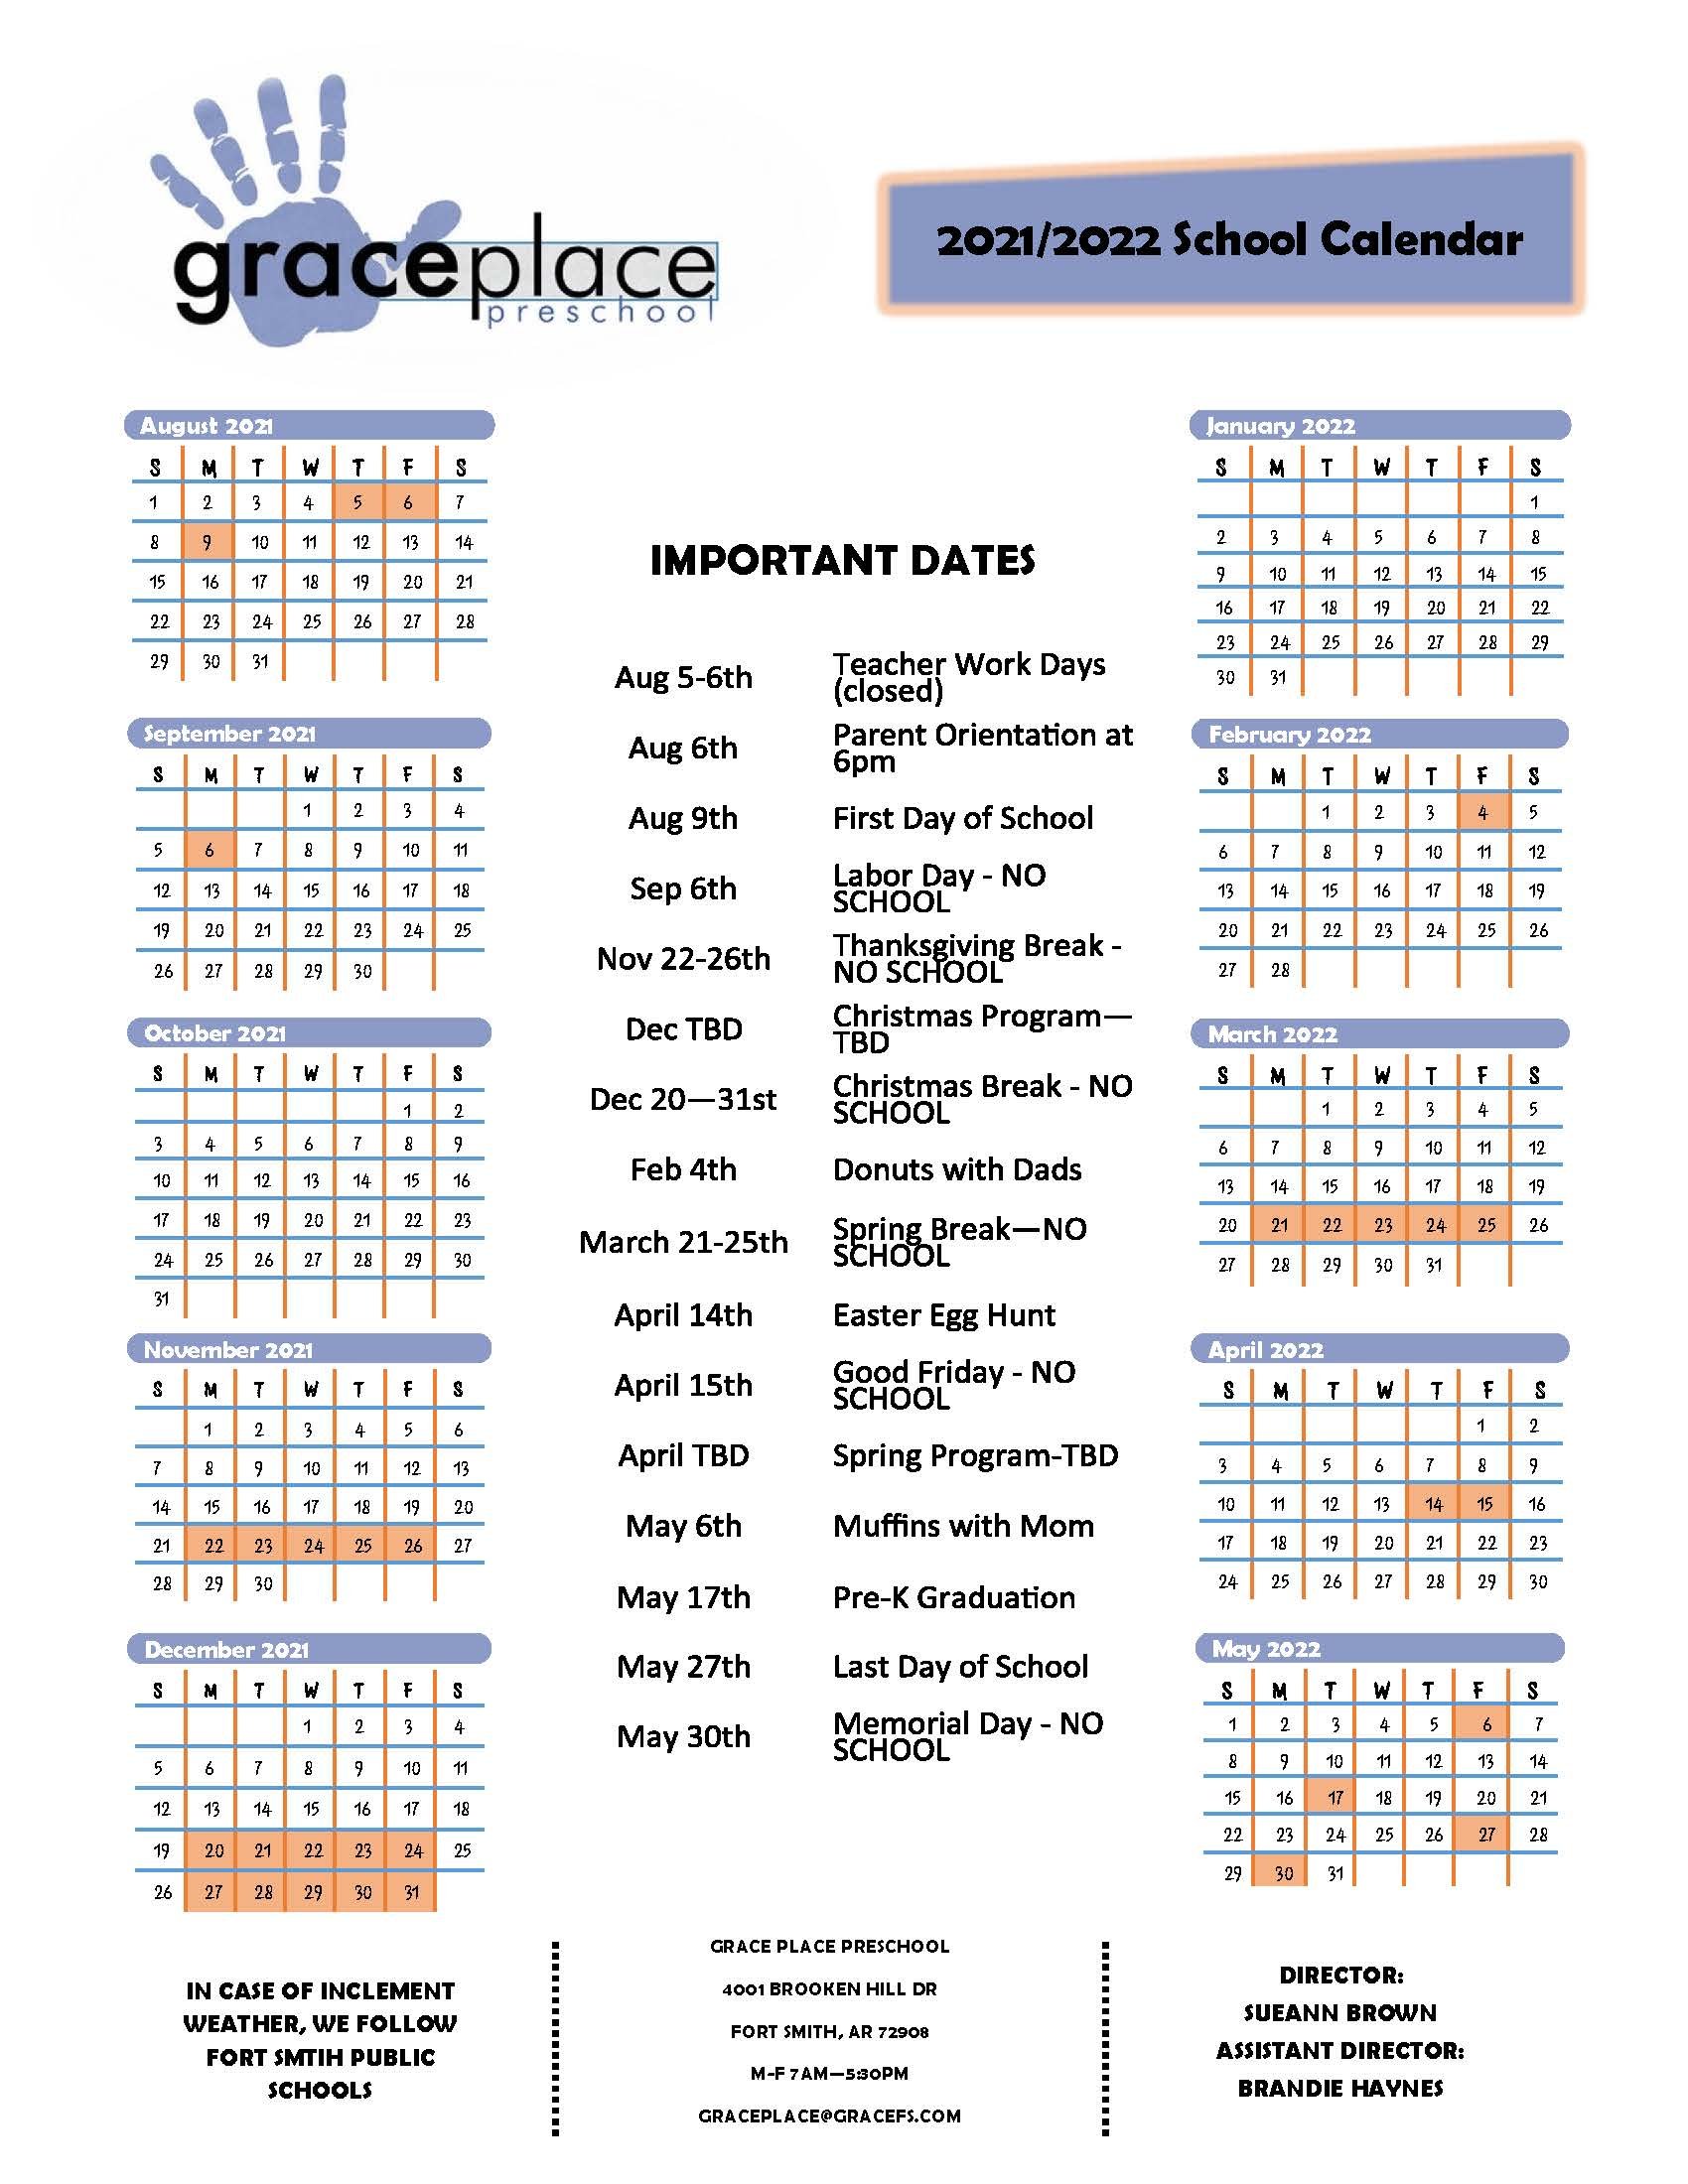 Calendar Grace Place of Fort Smith